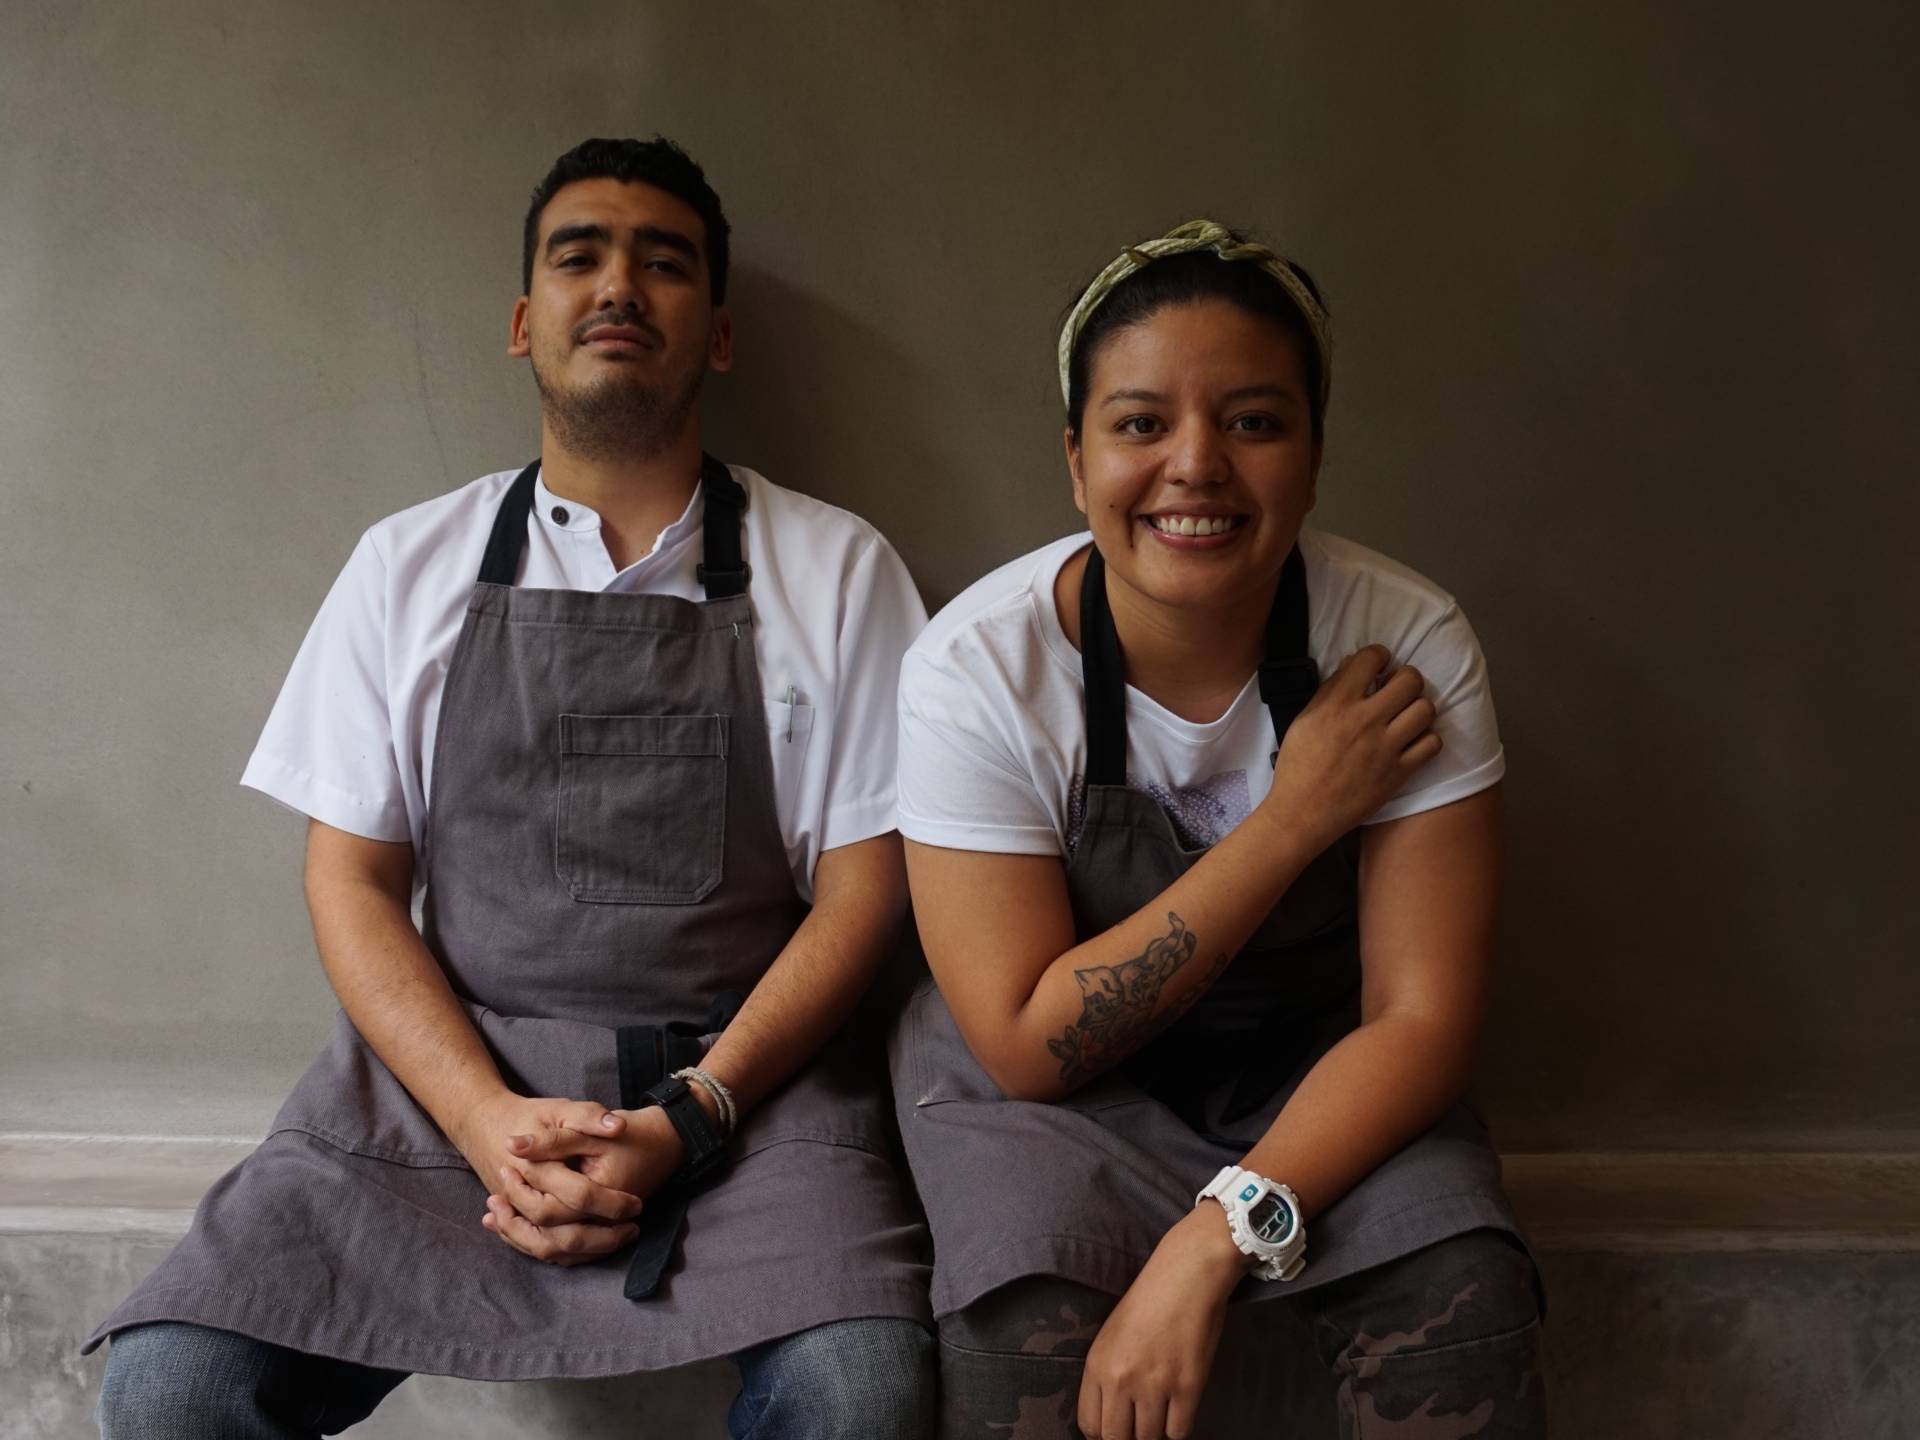 Chefs Mario Portillo and Fatima Mirandal of Boca Boca restaurant. "The flavor is new and exciting for our generation, and brings back a flood of good memories for the older people," Mirandal says.